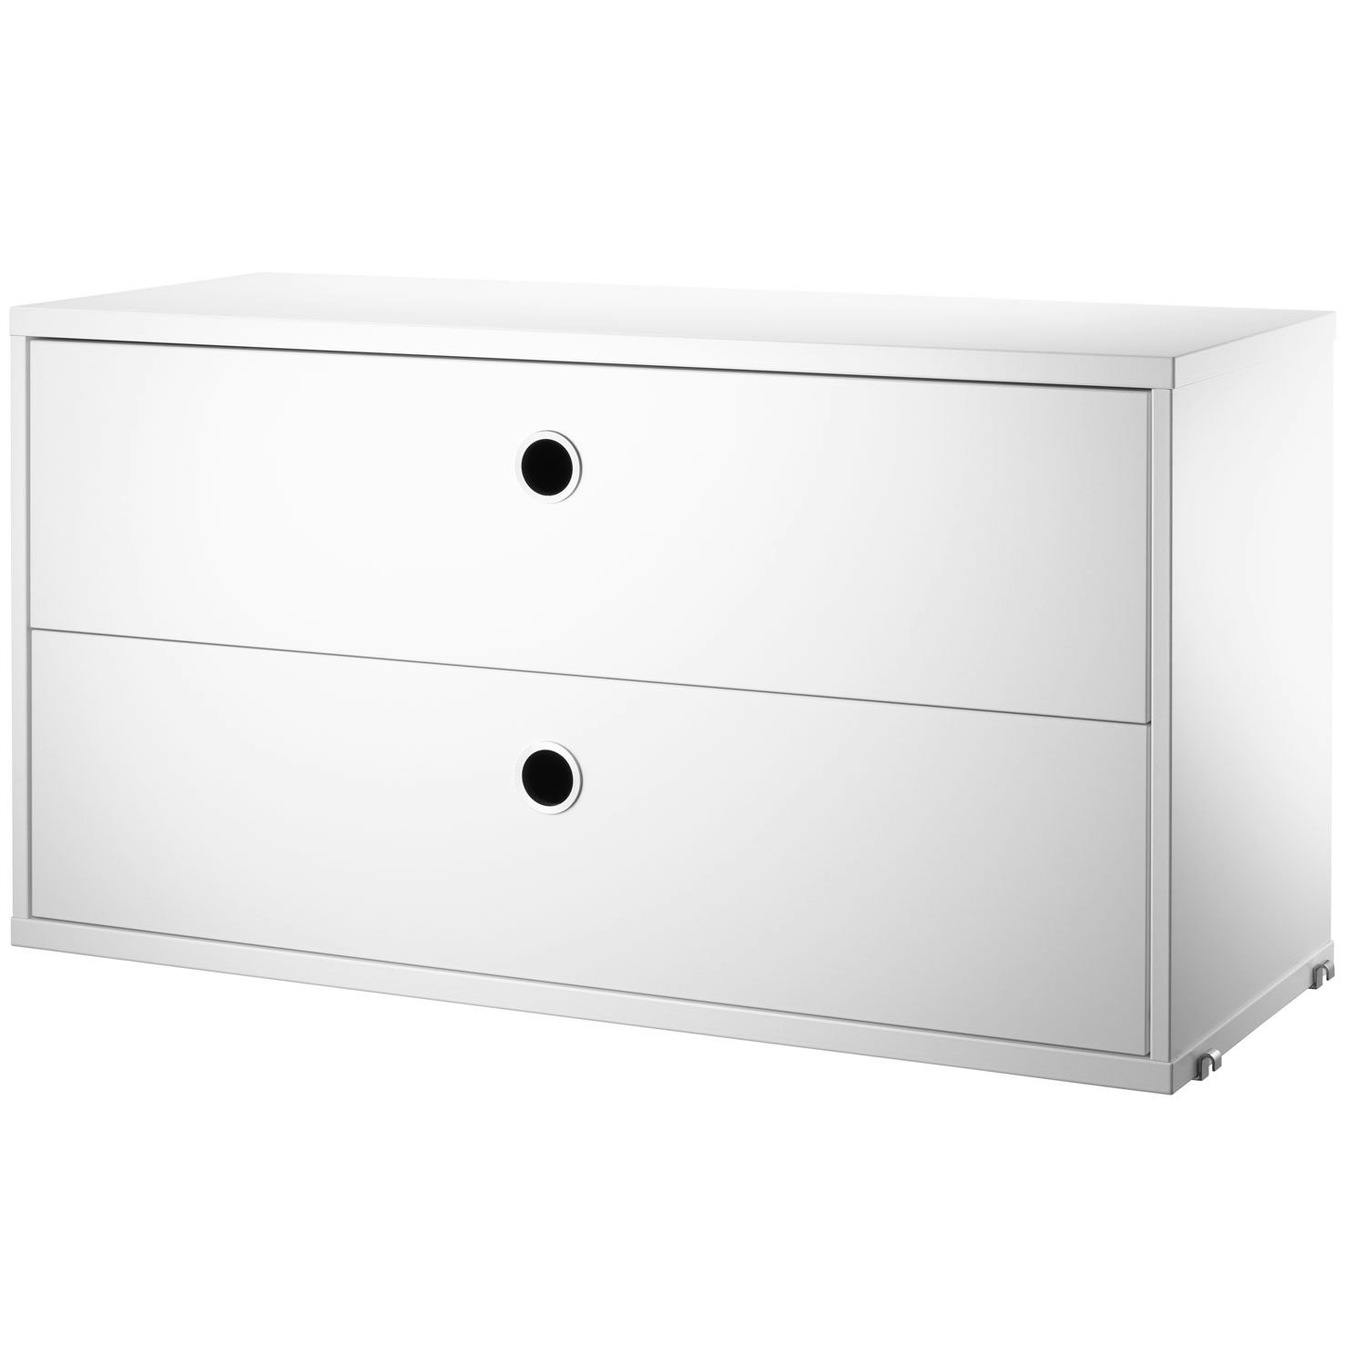 String Chest Of Drawers 78x30 cm, White